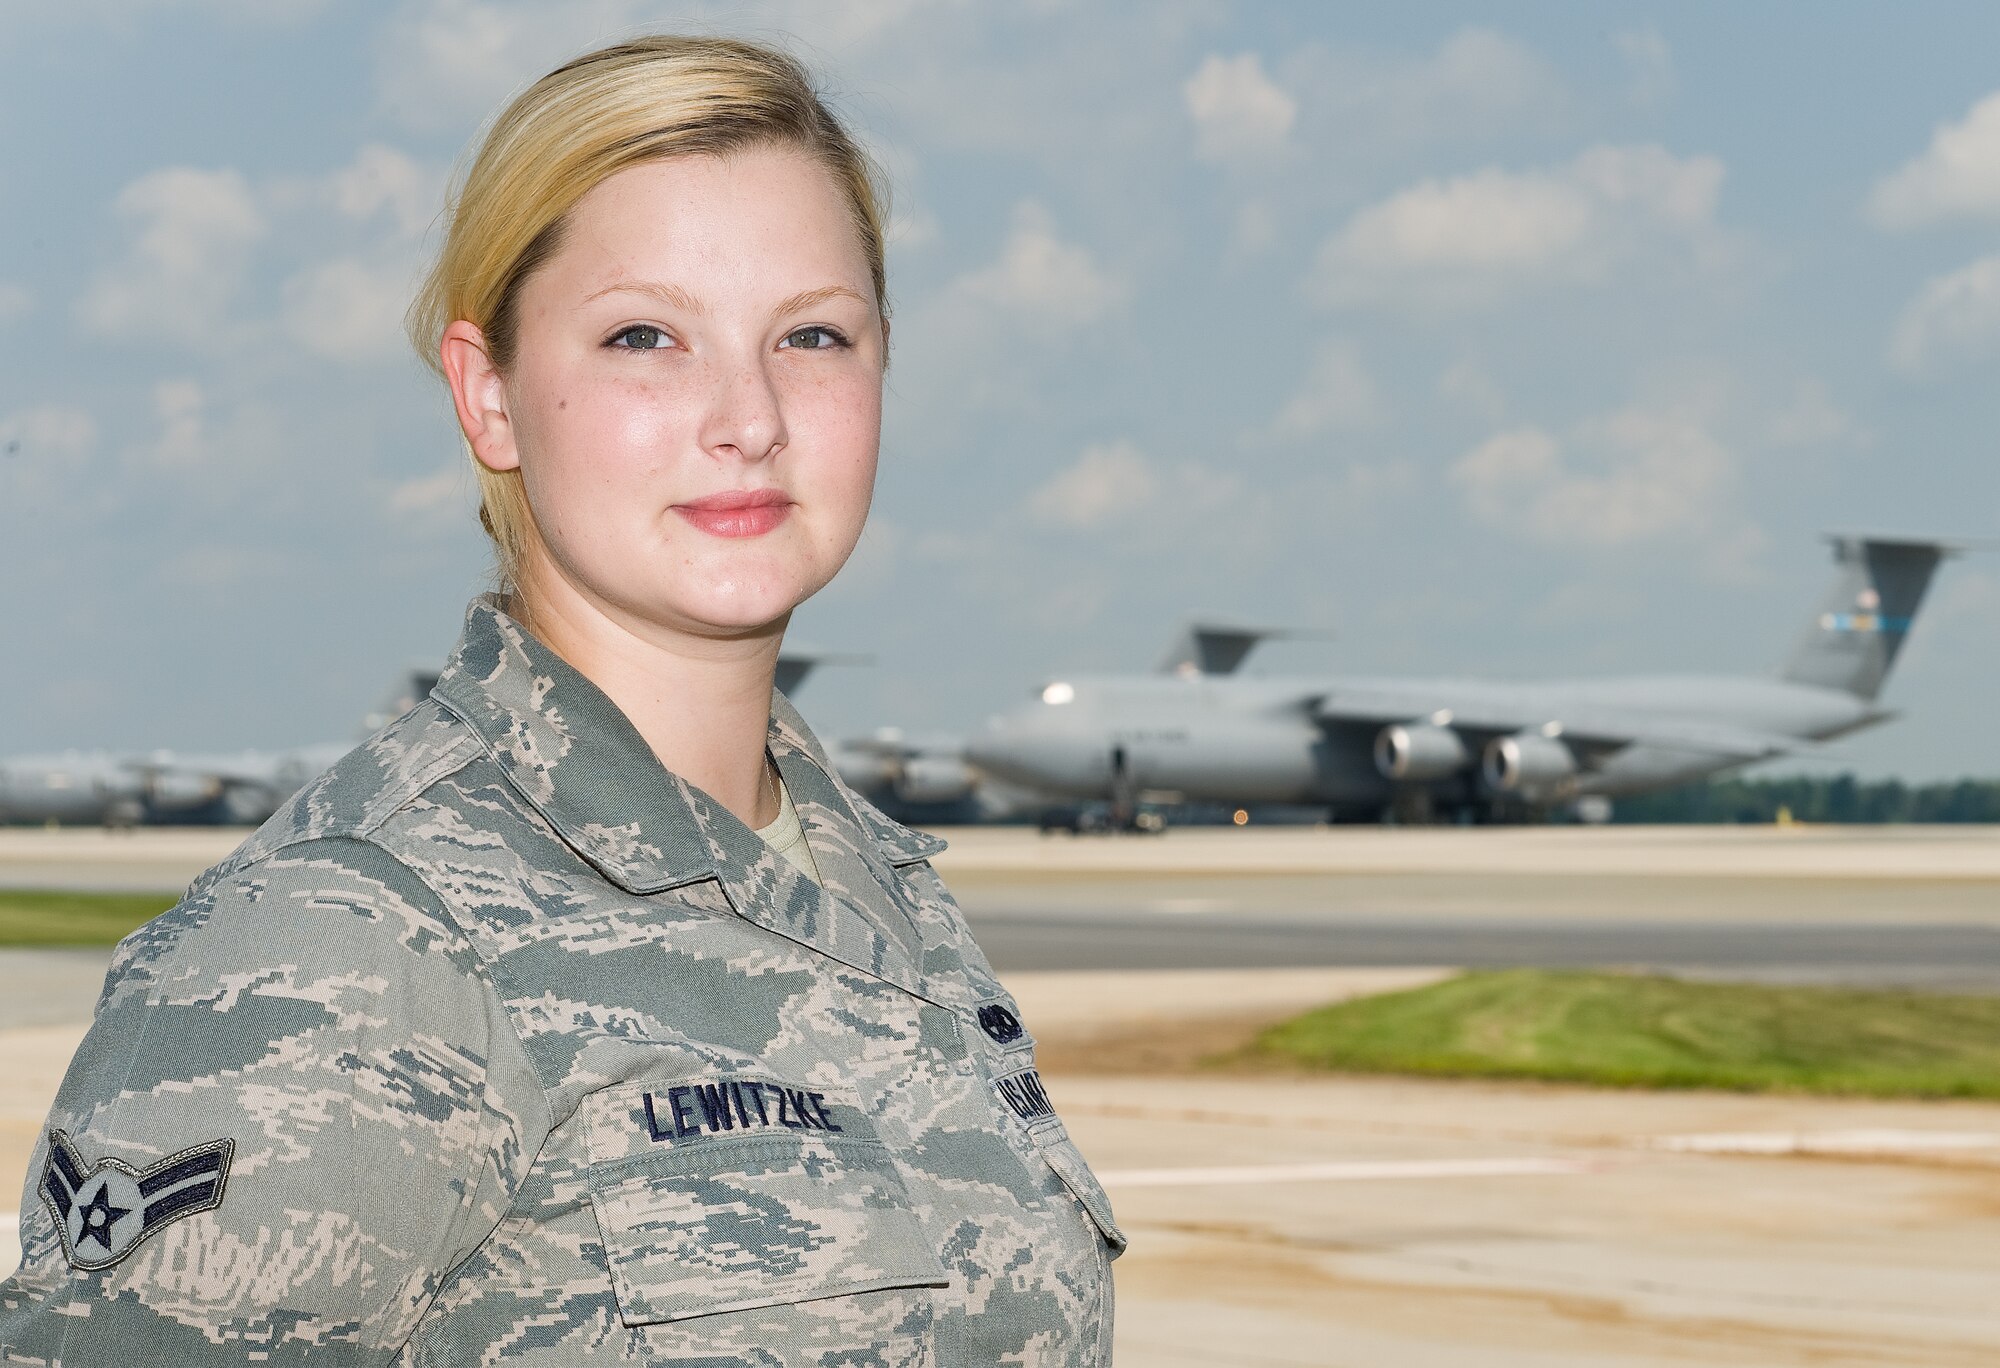 Airman 1st Class Alexis Lewitzke, 436th Maintenance Squadron C-5 aerospace maintenance journeyman poses for a photo July 31, 2014, at Dover Air Force Base, Del. Lewitzke was randomly selected for The Airlifter's feature "A face of Team Dover: Vol. 1, No. 1." (U.S. Air Force photo by Roland Balik)